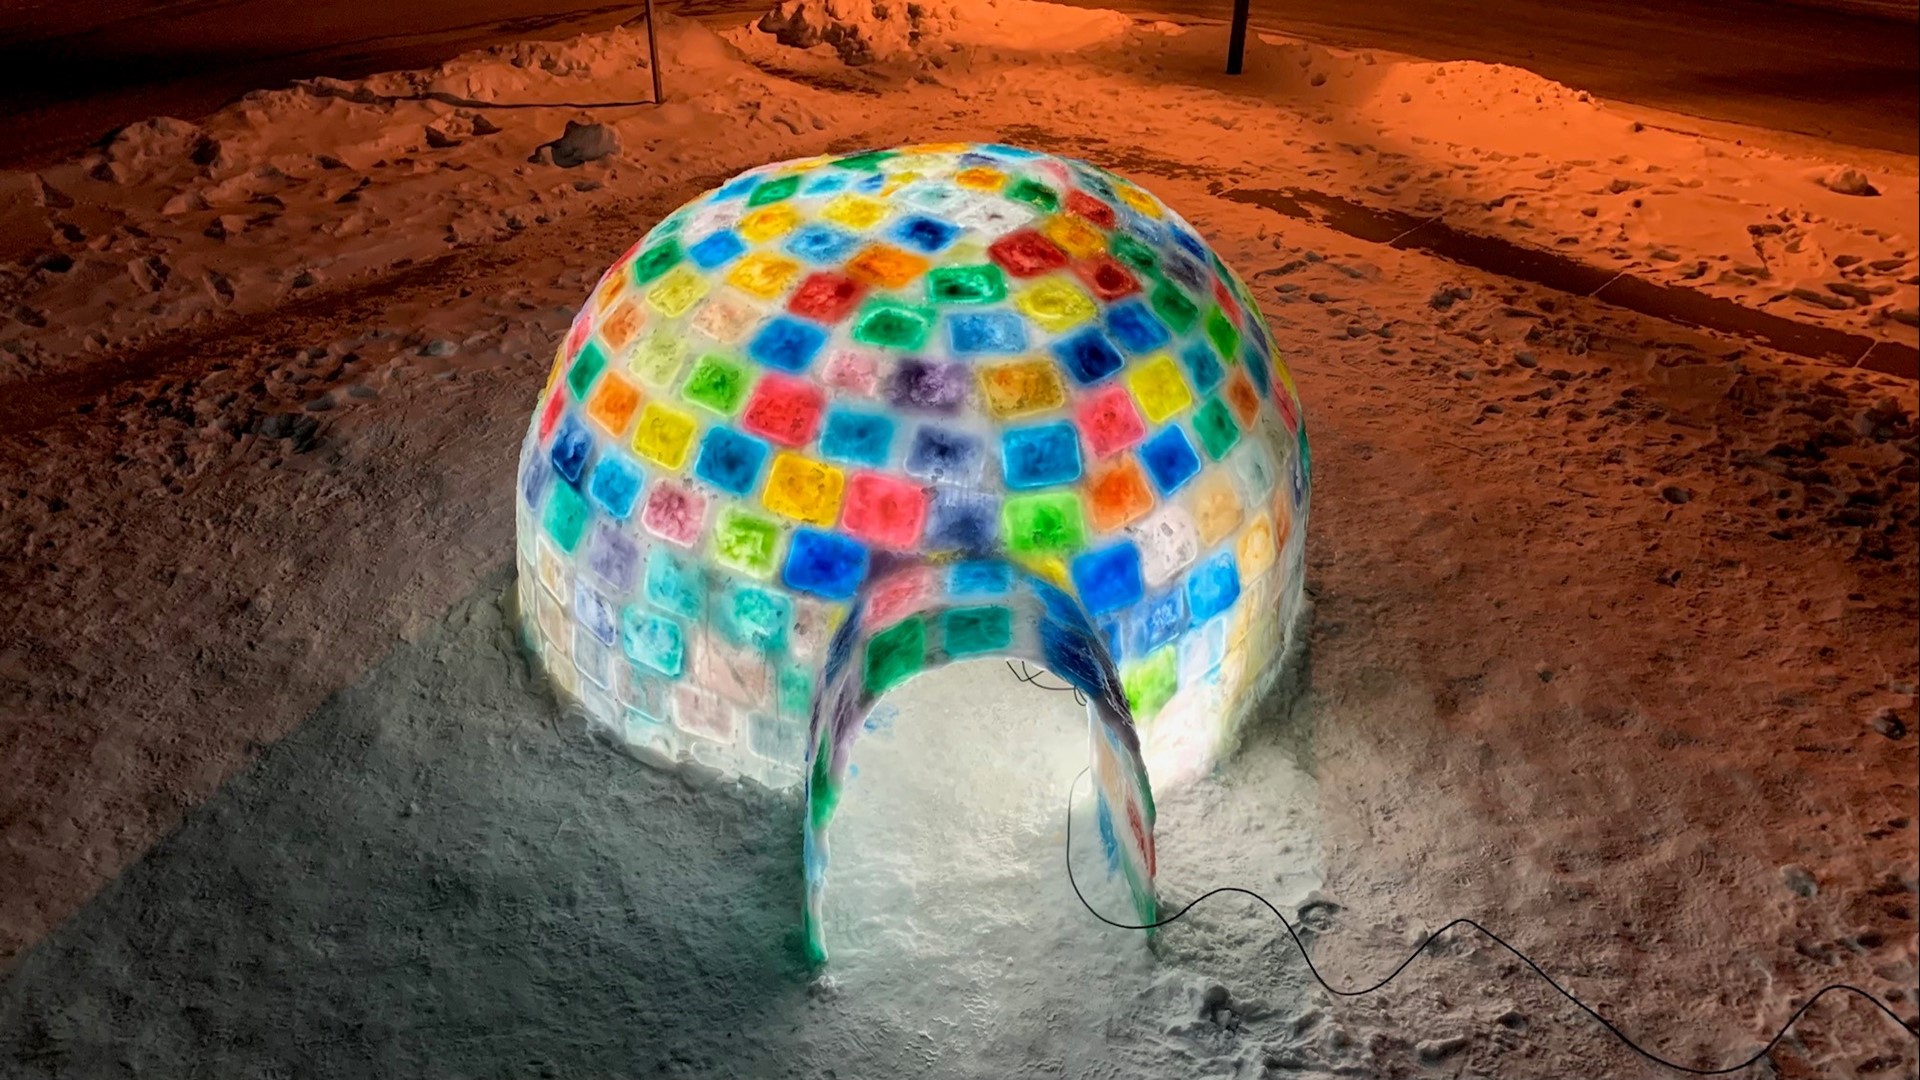 Jessica Montenegro built the igloo in her front yard with her two young sons.